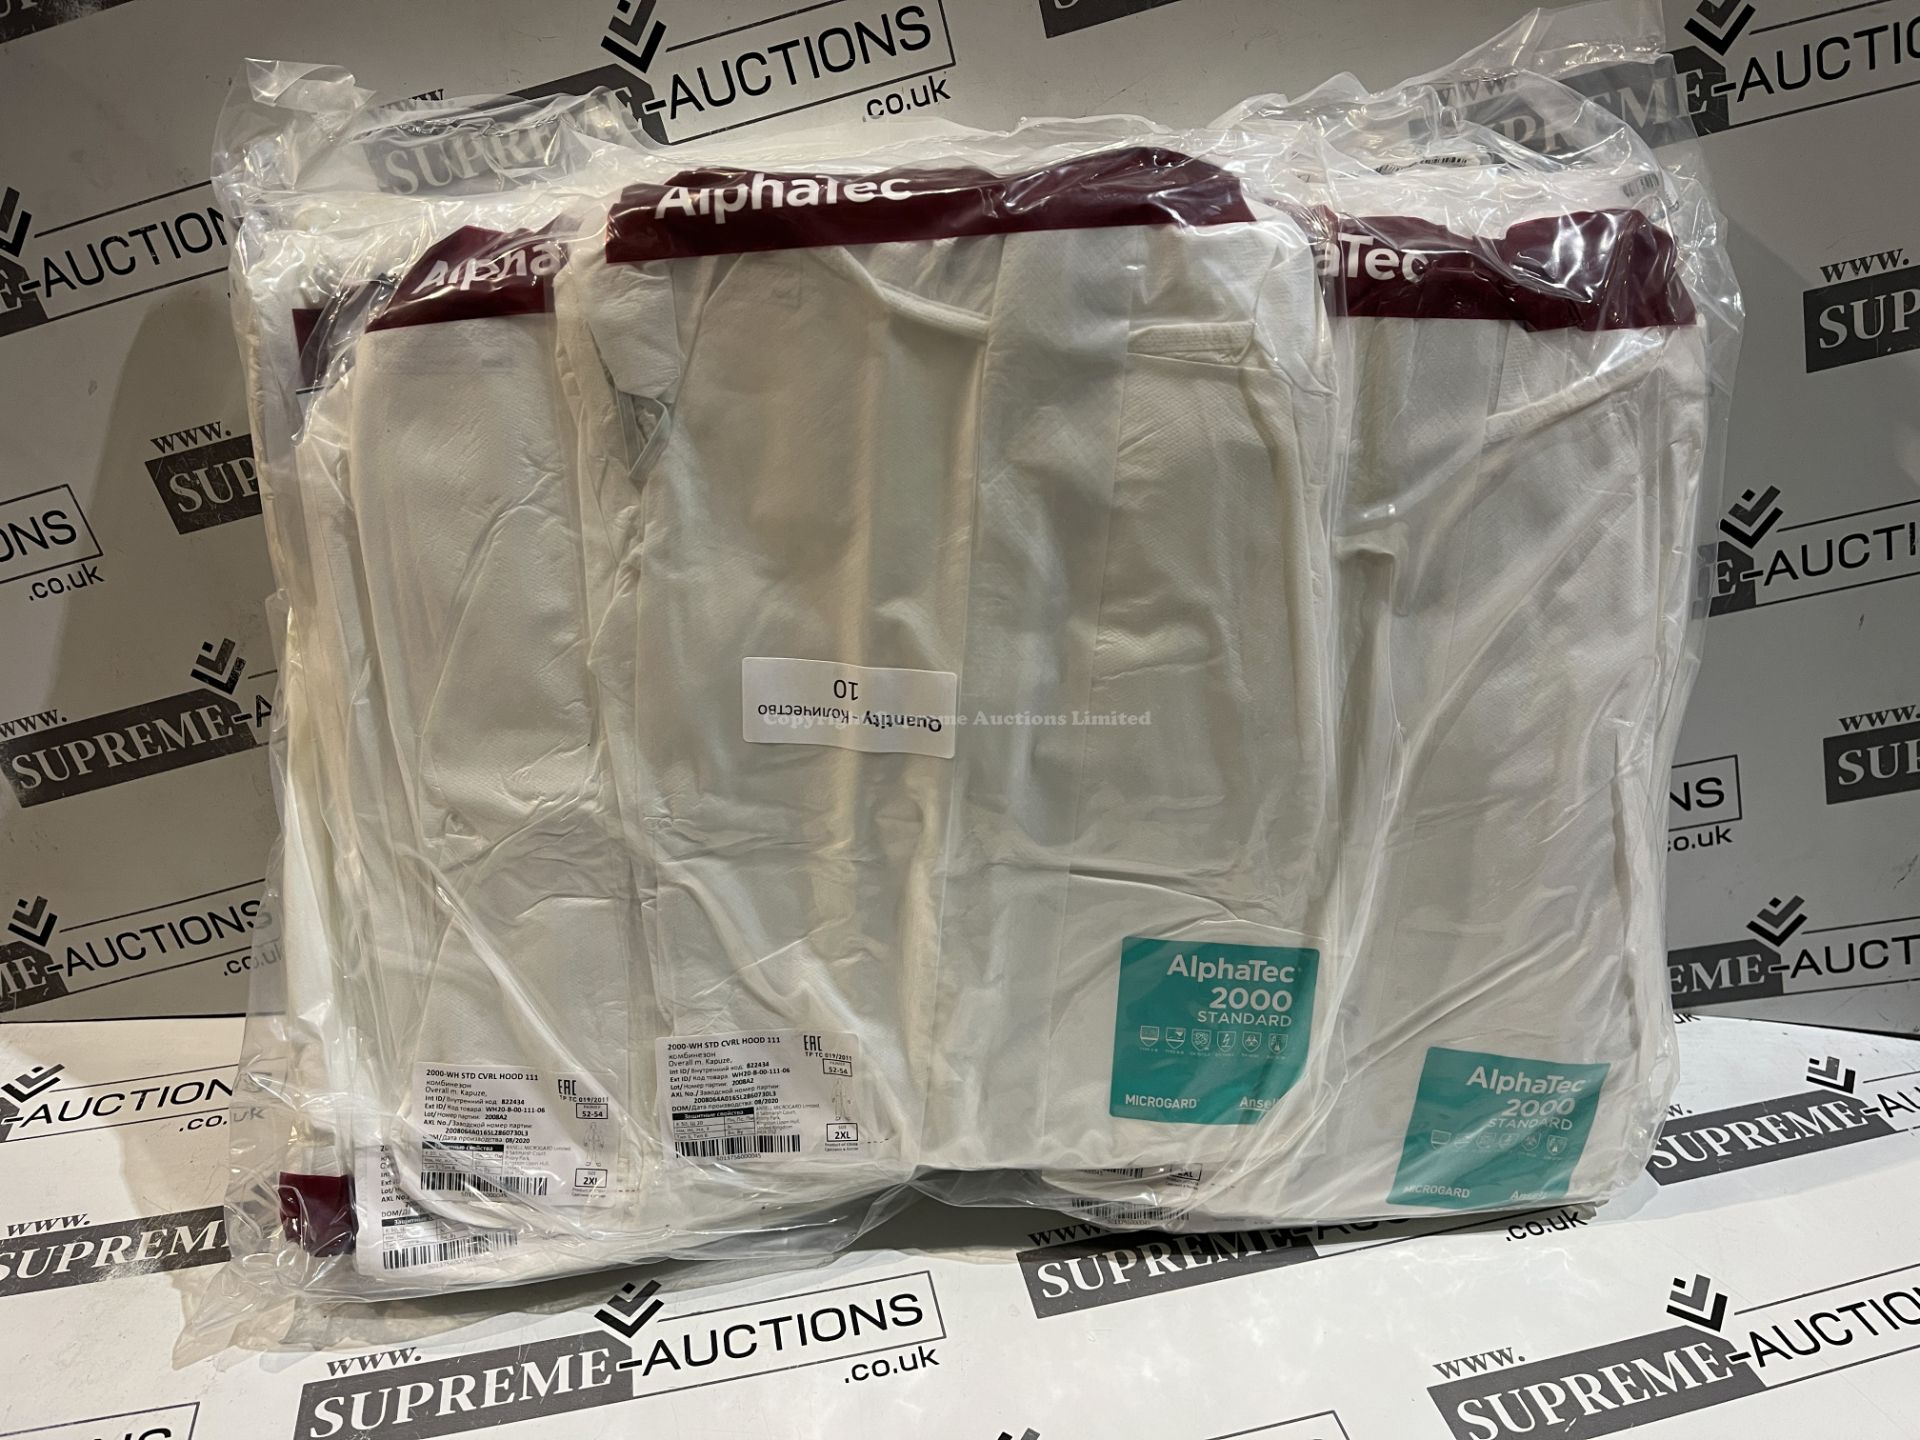 40x BRAND NEW ALPHATEC WHITE HOODED COVERALLS - SIZE EXTRA LARGE. (R7-8)